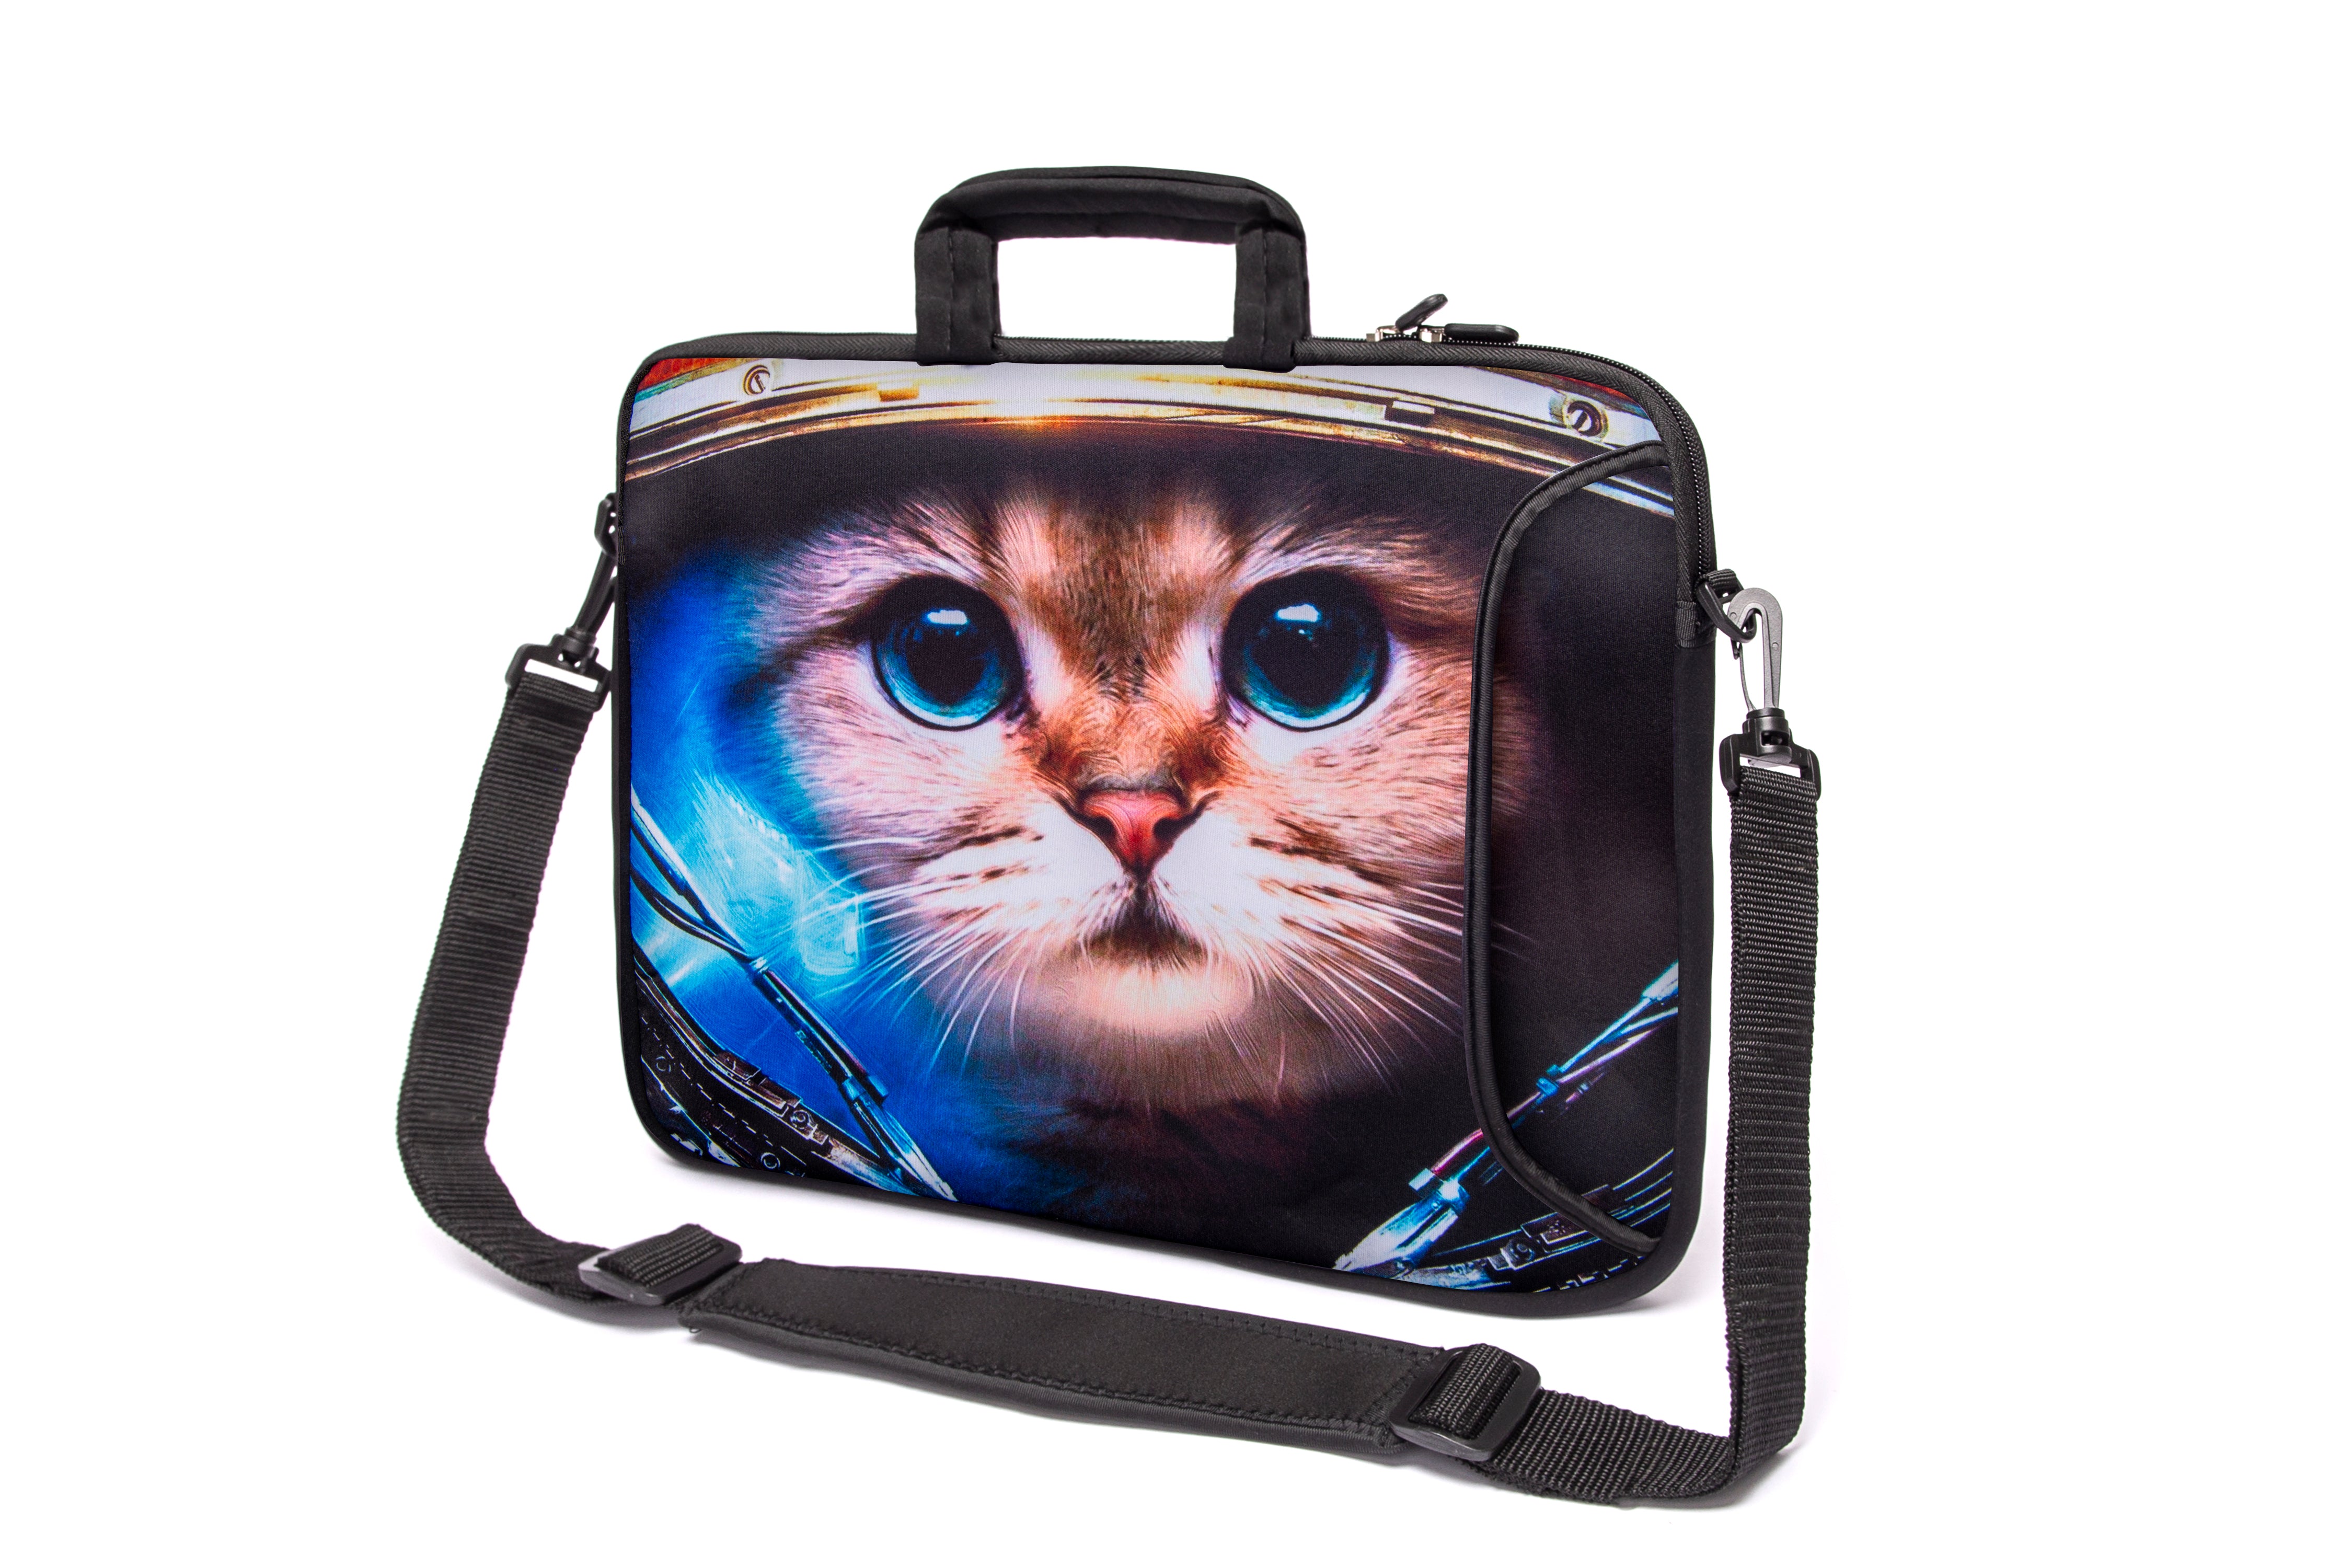 15"- 15.6" (inch) LAPTOP BAG CARRY CASE/BAG WITH HANDLE & STRAP NEOPRENE FOR LAPTOPS/NOTEBOOKS, *Cat Astronaut*